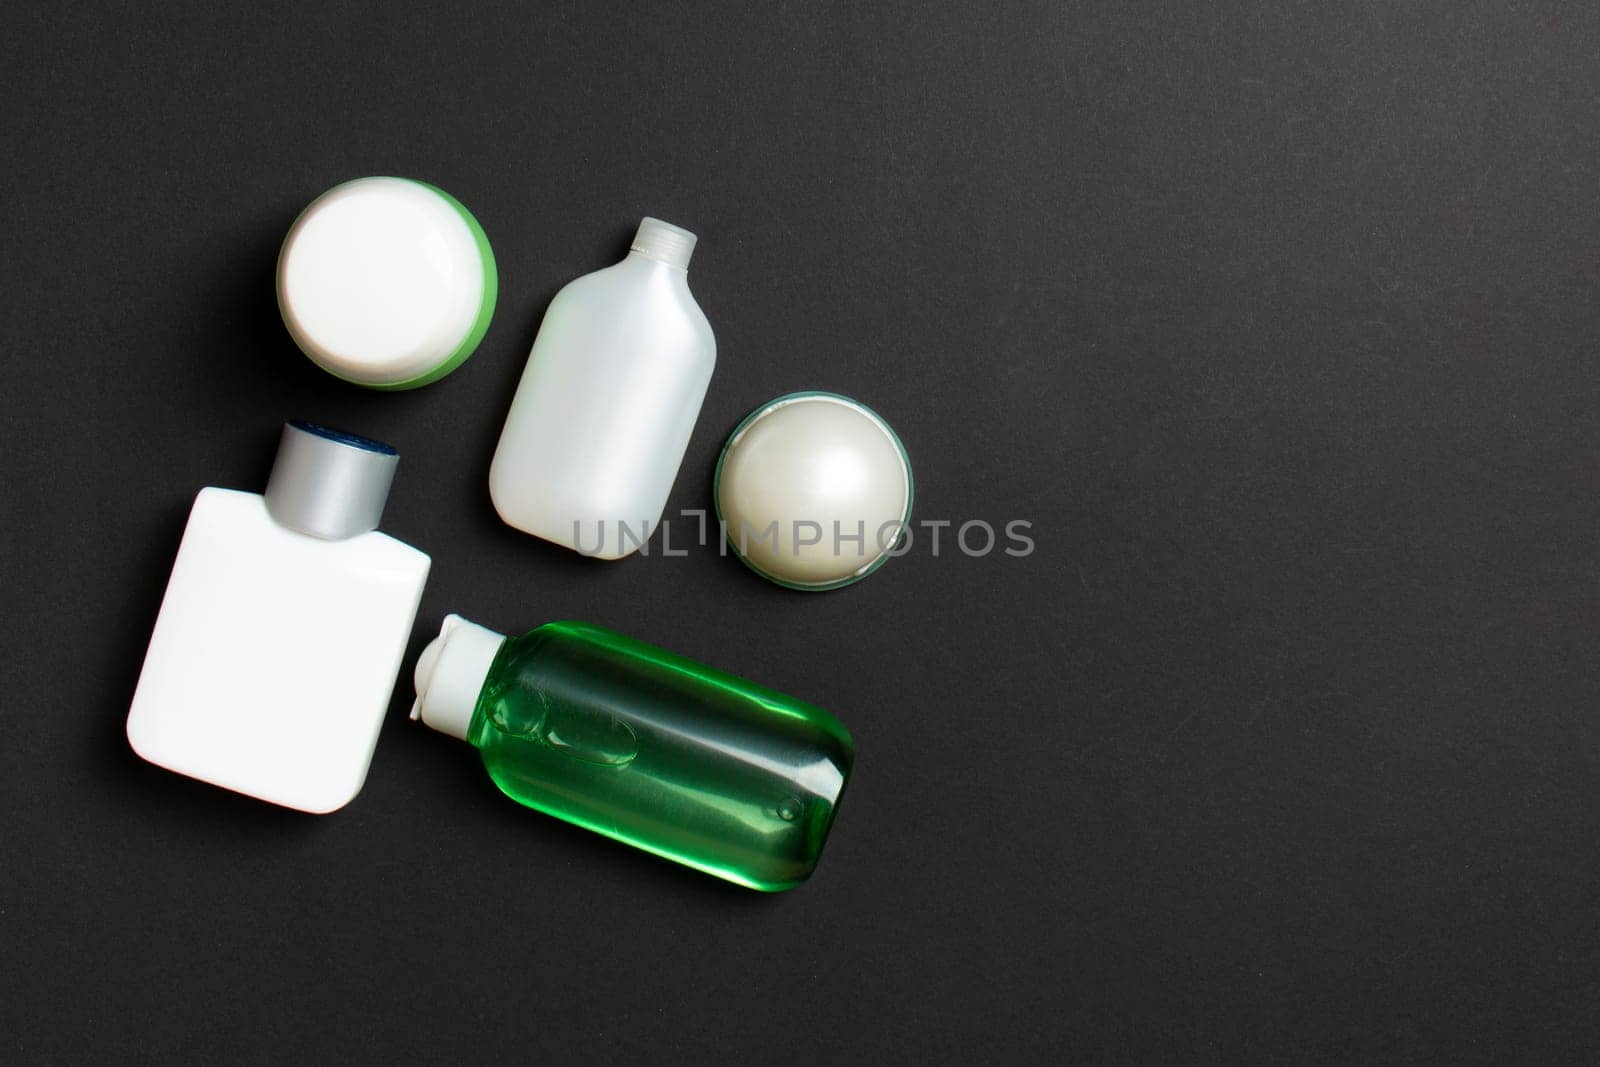 Cosmetics SPA branding mock-up, top view with copy space. set of tubes and jars of cream flat lay on colored background.